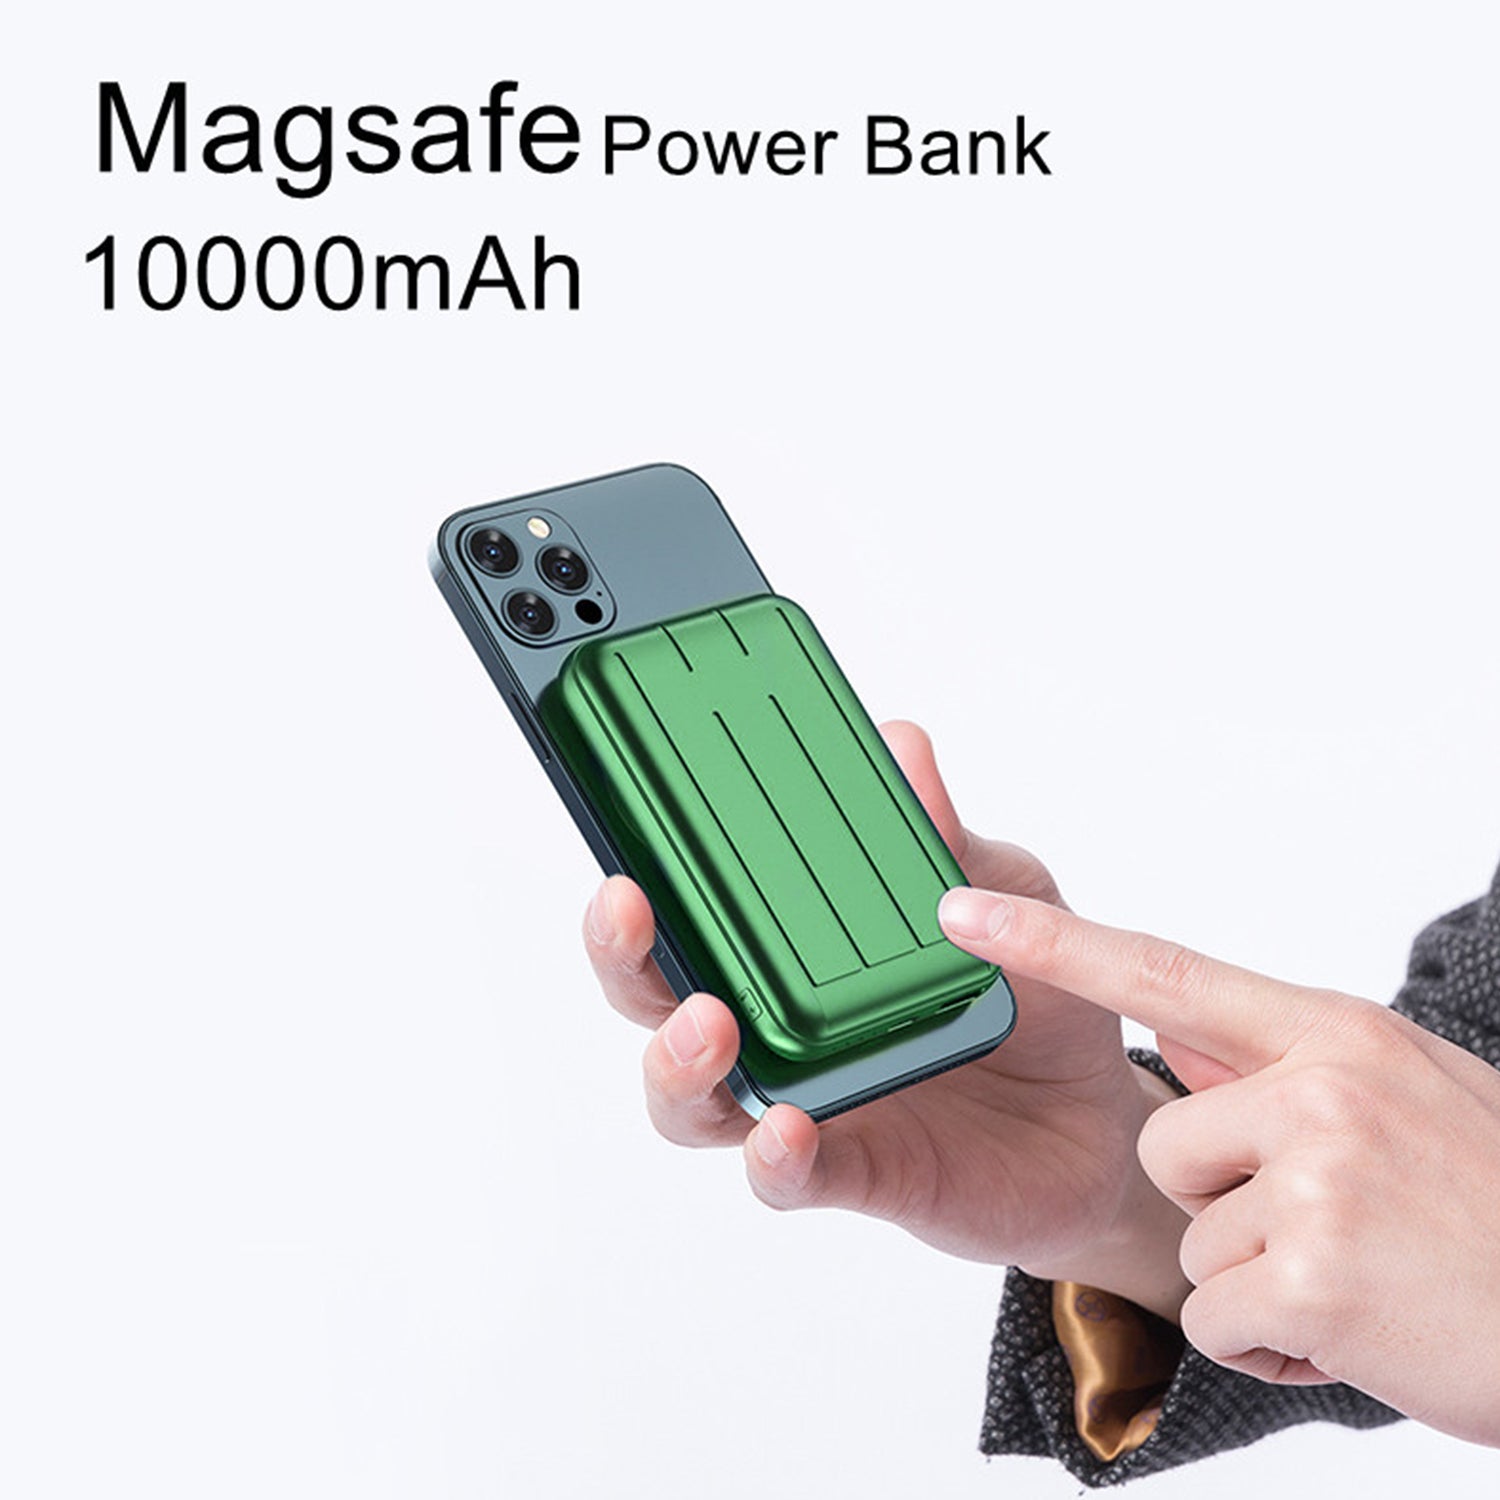 Magnetic Wireless PD Power Bank 10000mAh QC3.0 Quick Charge For iPhone/Samsung/Huawei